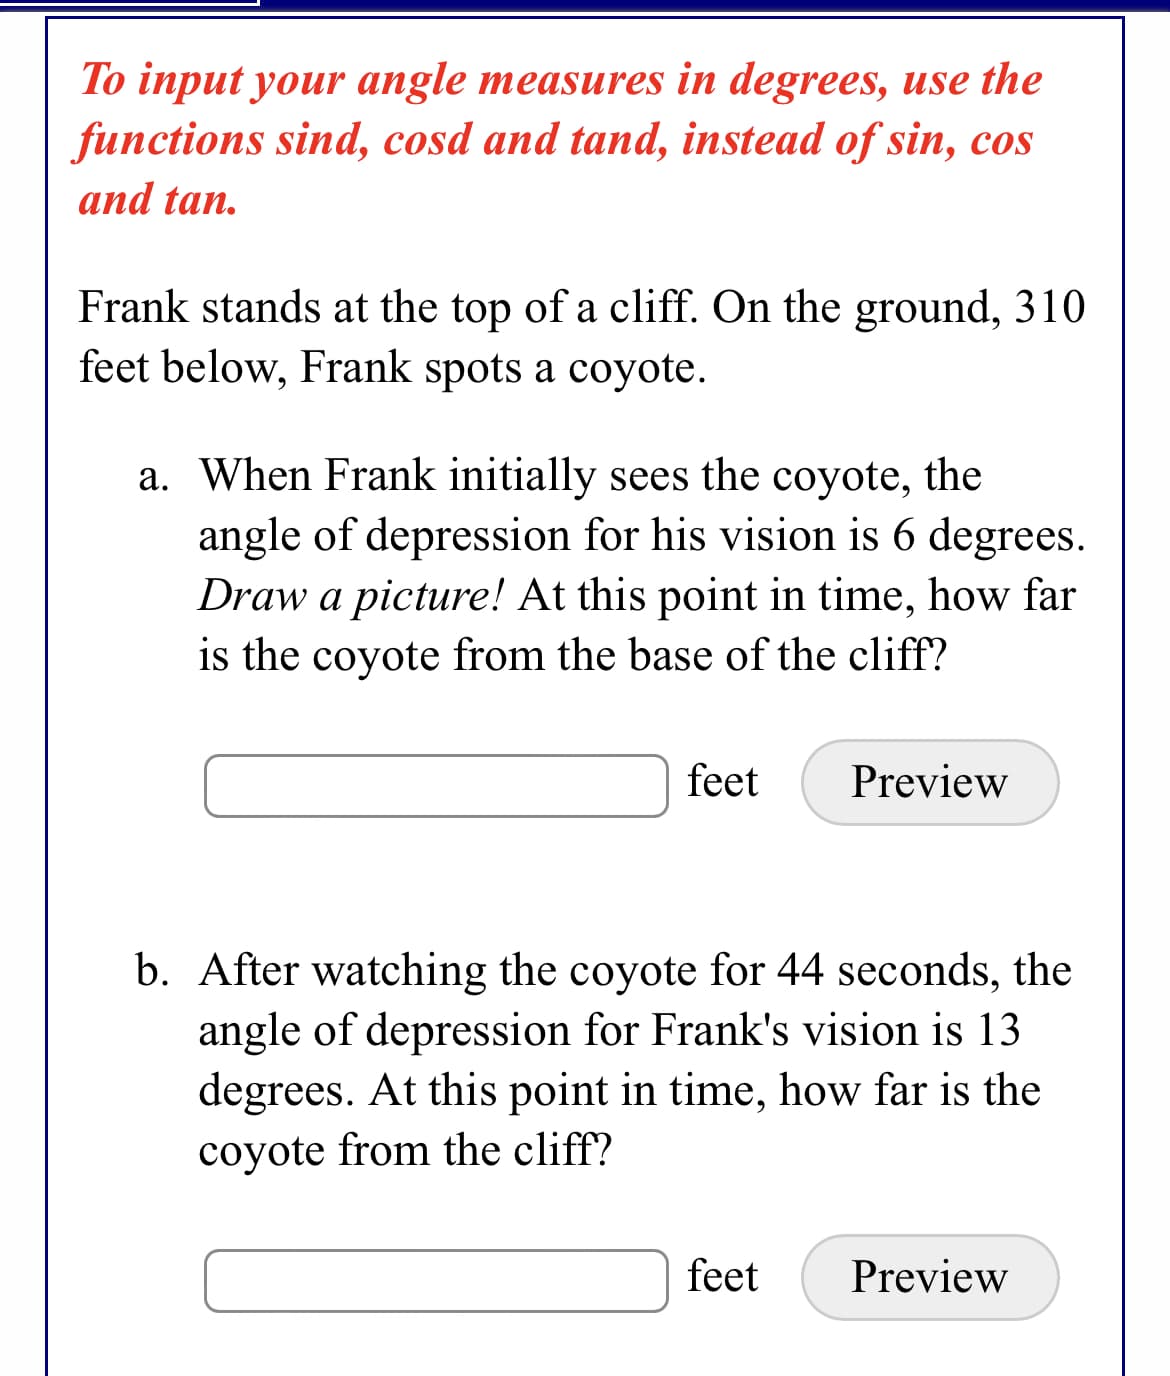 To input your angle measures in degrees, use the
functions sind, cosd and tand, instead of sin, cos
and tan.
Frank stands at the top of a cliff. On the ground, 310
feet below, Frank spots a coyote.
a. When Frank initially sees the coyote, the
angle of depression for his vision is 6 degrees.
Draw a picture! At this point in time, how far
is the coyote from the base of the cliff?
feet
Preview
b. After watching the coyote for 44 seconds, the
angle of depression for Frank's vision is 13
degrees. At this point in time, how far is the
coyote from the cliff?
feet
Preview
